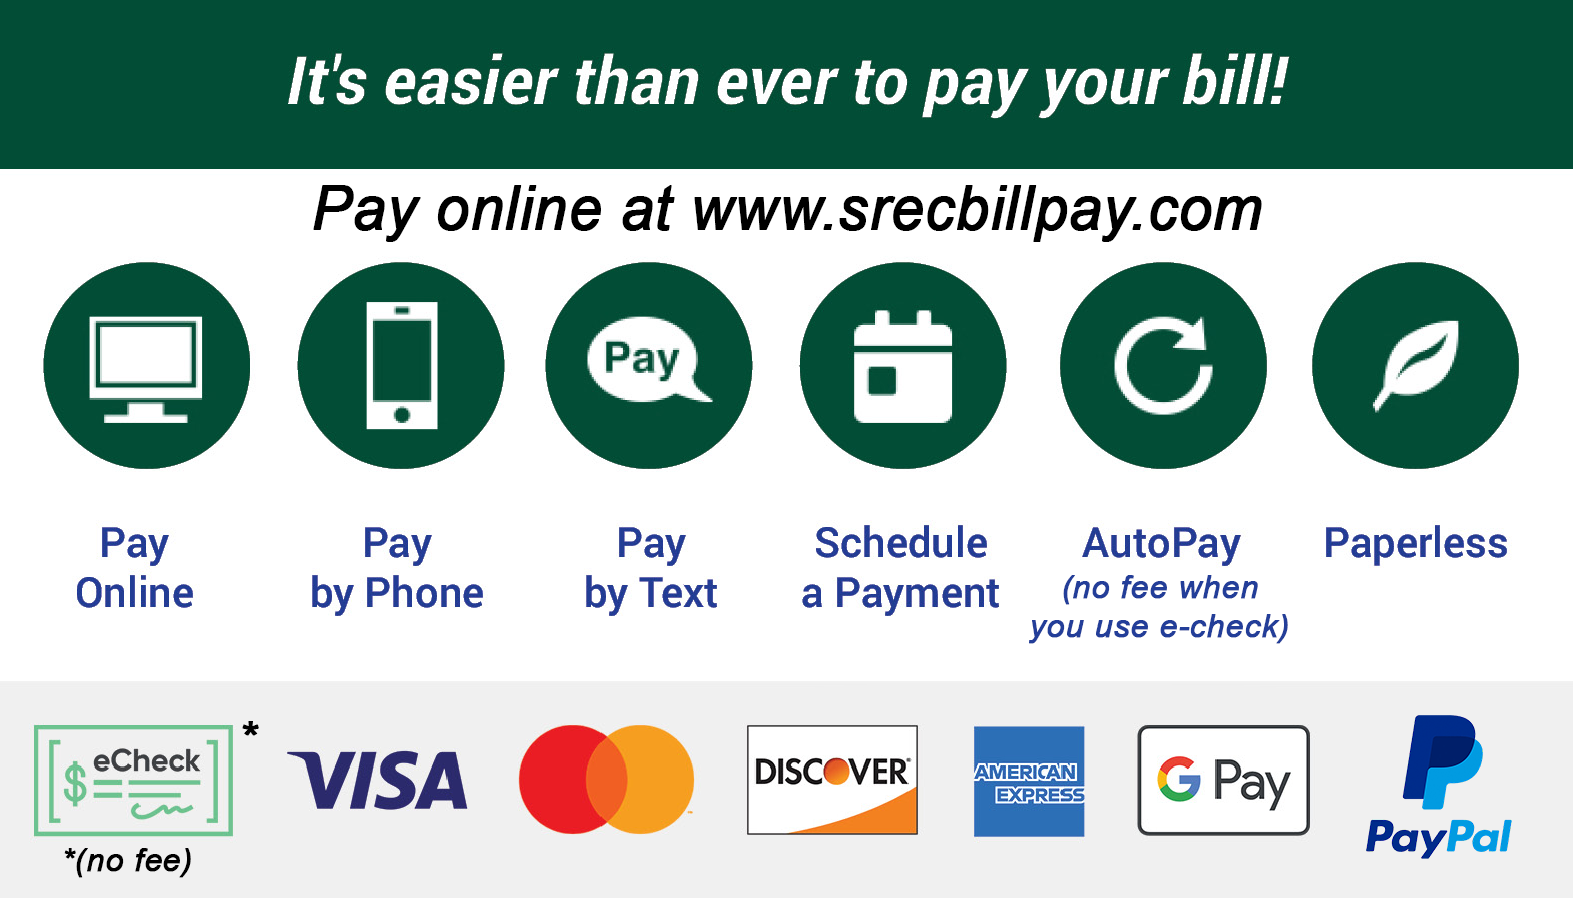 It's easier than ever to pay your bill! Go to www.srecbillpay.com. Pay Online, Pay by Phone, Pay by Text, Schedule a Payment, AutoPay (it's FREE when you use e-check), Paperless. We accept eCheck, Visa, Mastercard, Discover, American Express, and more!